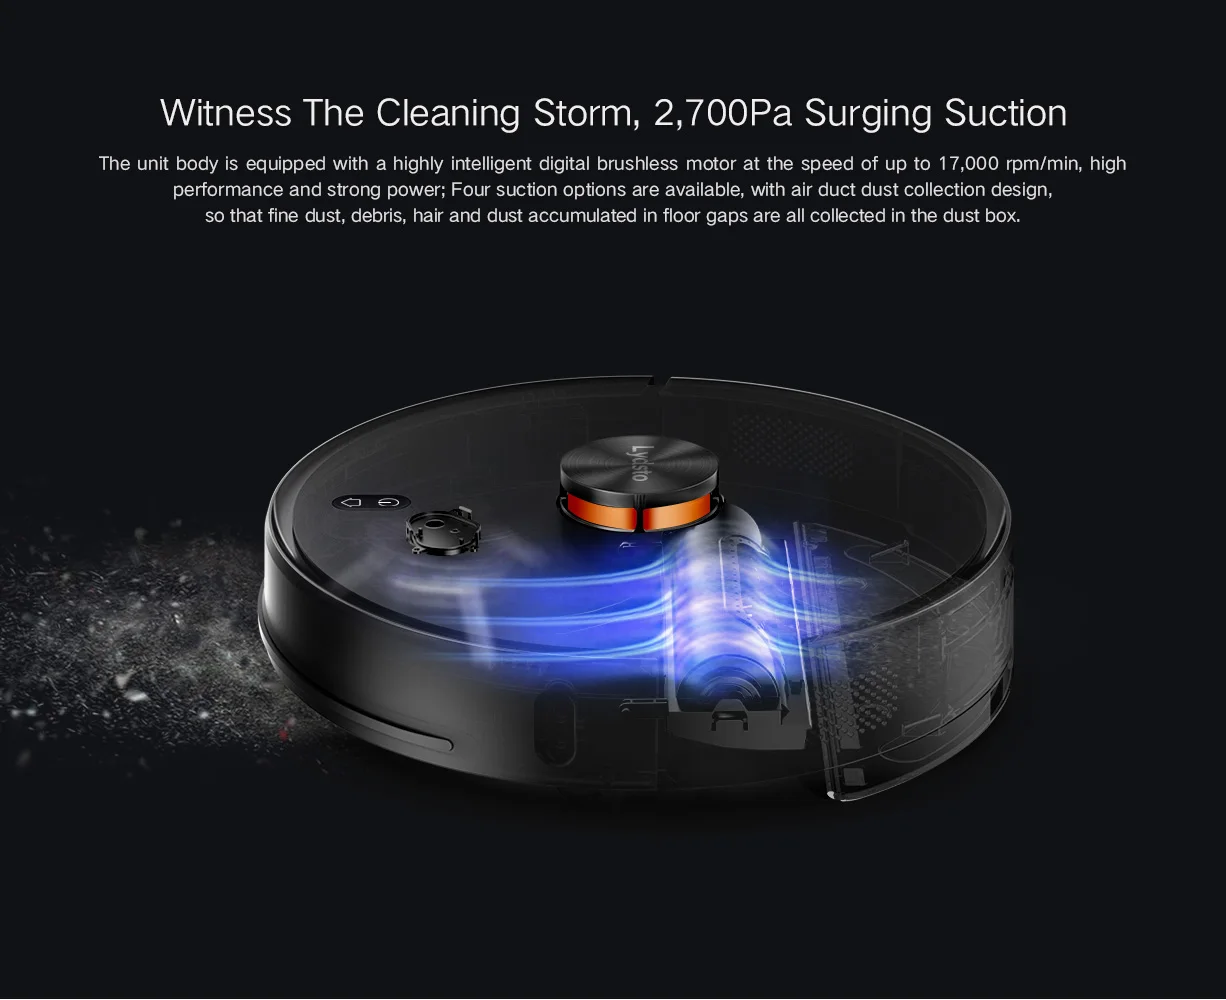 Xiaomi lydsto robot vacuum cleaner. Xiaomi lydsto r1. Lydsto r1 робот-пылесос. Робот-пылесос Xiaomi lydsto r1 Robot Vacuum Cleaner. Пылесос Xiaomi lydsto.